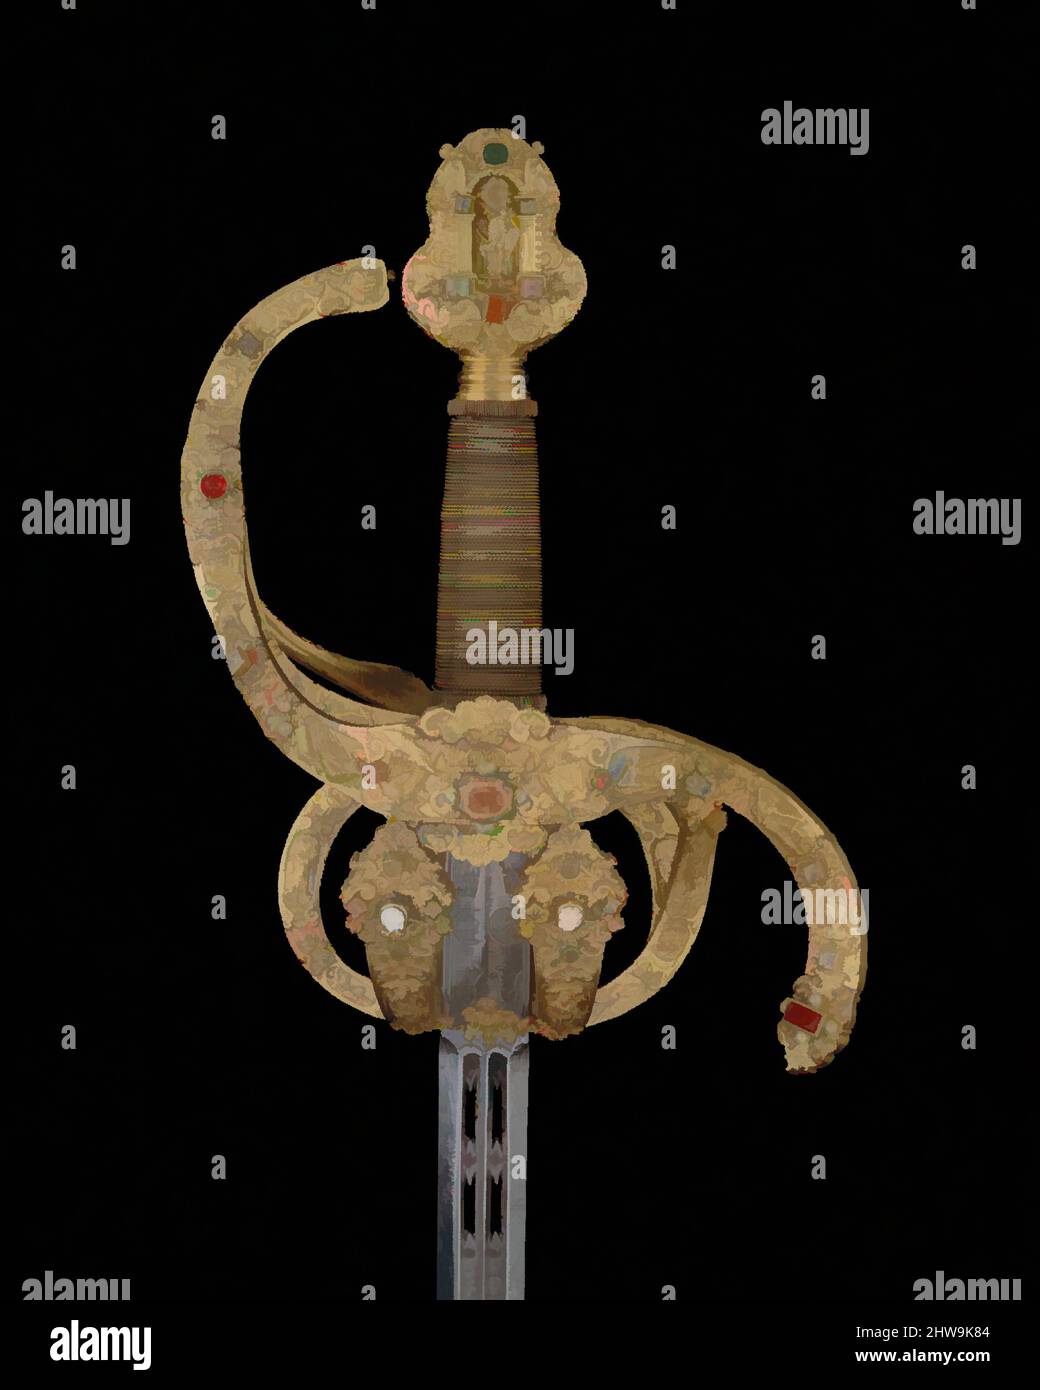 Art inspired by Rapier of Prince-Elector Christian II of Saxony (1583–1611), dated 1606, Dresden; Toledo, hilt, German, Dresden; blade, Spanish, Toledo, Steel, bronze, gold, enamel, paste jewels, cameos, pearls, wood, L. 48 in. (121.9 cm); L. of blade 41 1/4 in. (104.8 cm); W. 6 3/4 in, Classic works modernized by Artotop with a splash of modernity. Shapes, color and value, eye-catching visual impact on art. Emotions through freedom of artworks in a contemporary way. A timeless message pursuing a wildly creative new direction. Artists turning to the digital medium and creating the Artotop NFT Stock Photo